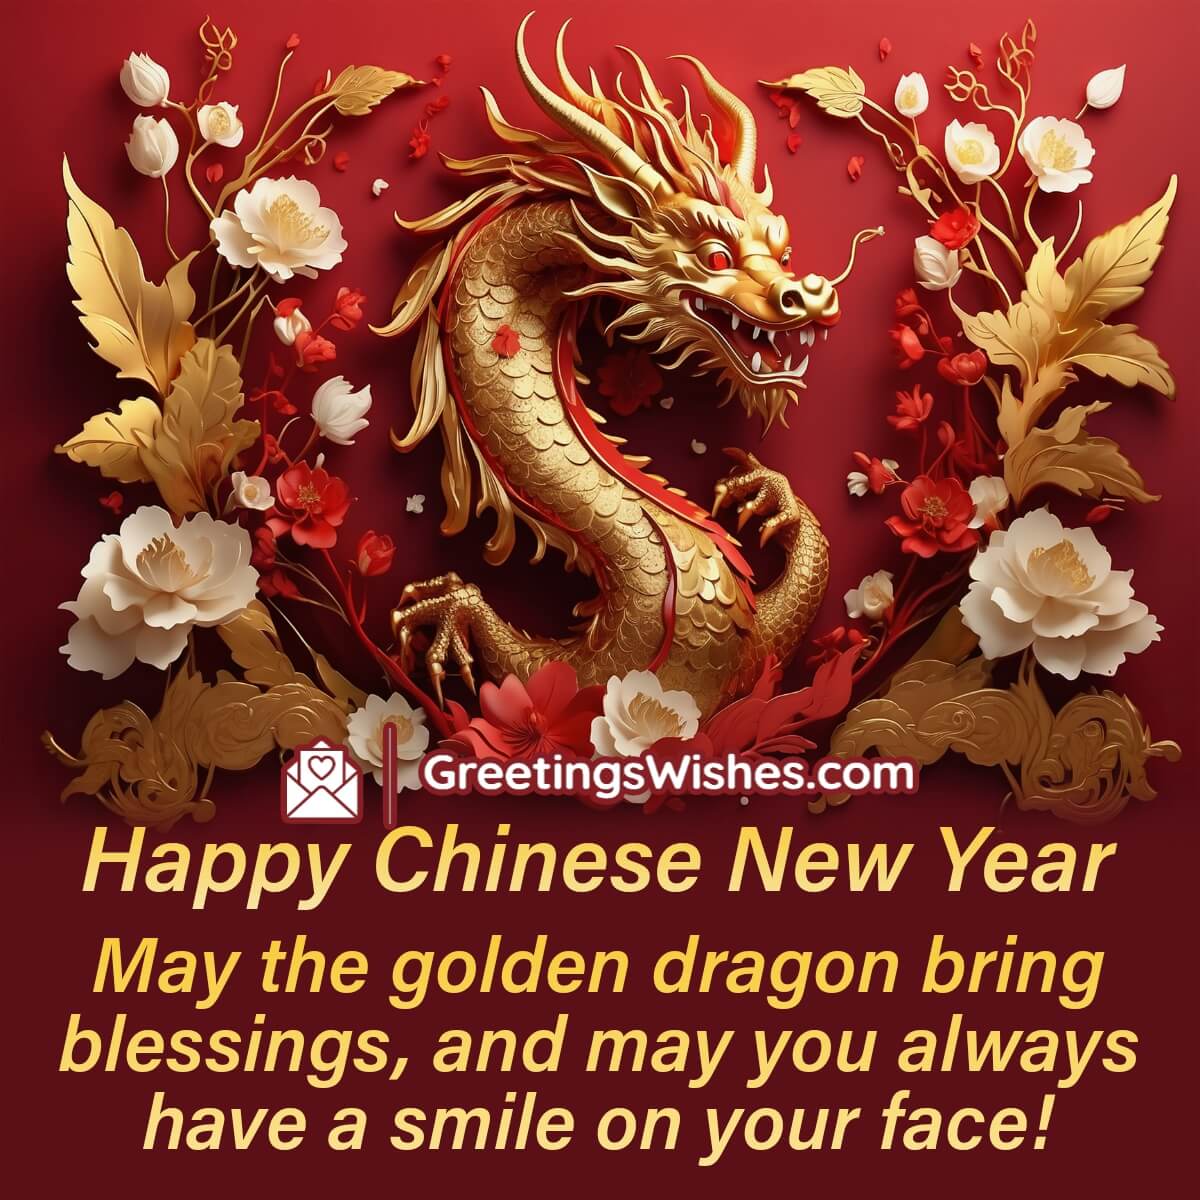 Happy Chinese New Year Blessings